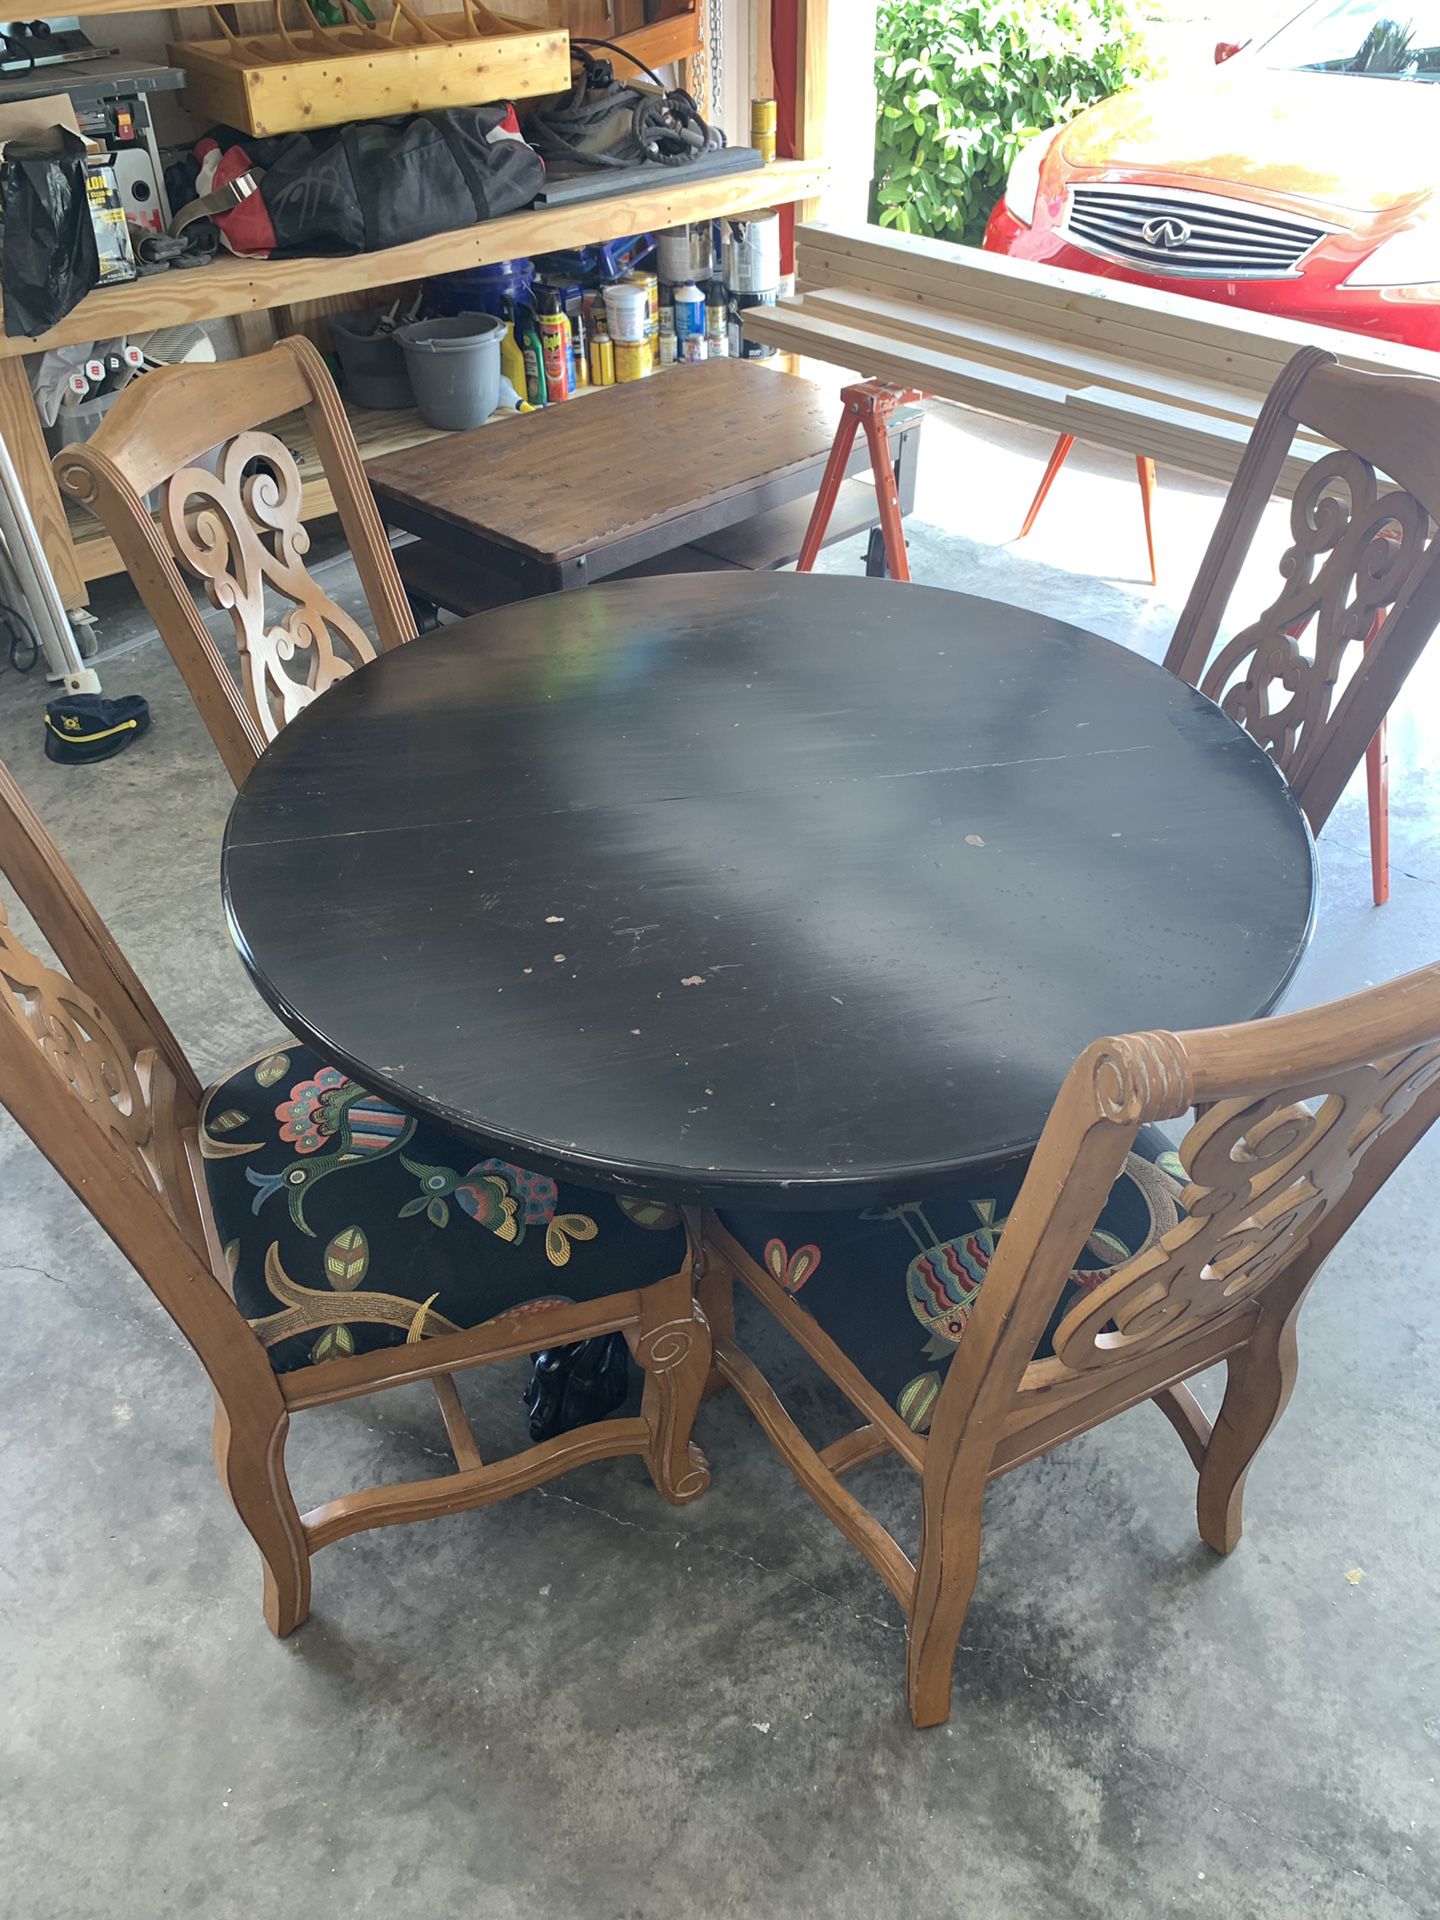 Table and chairs - FREE